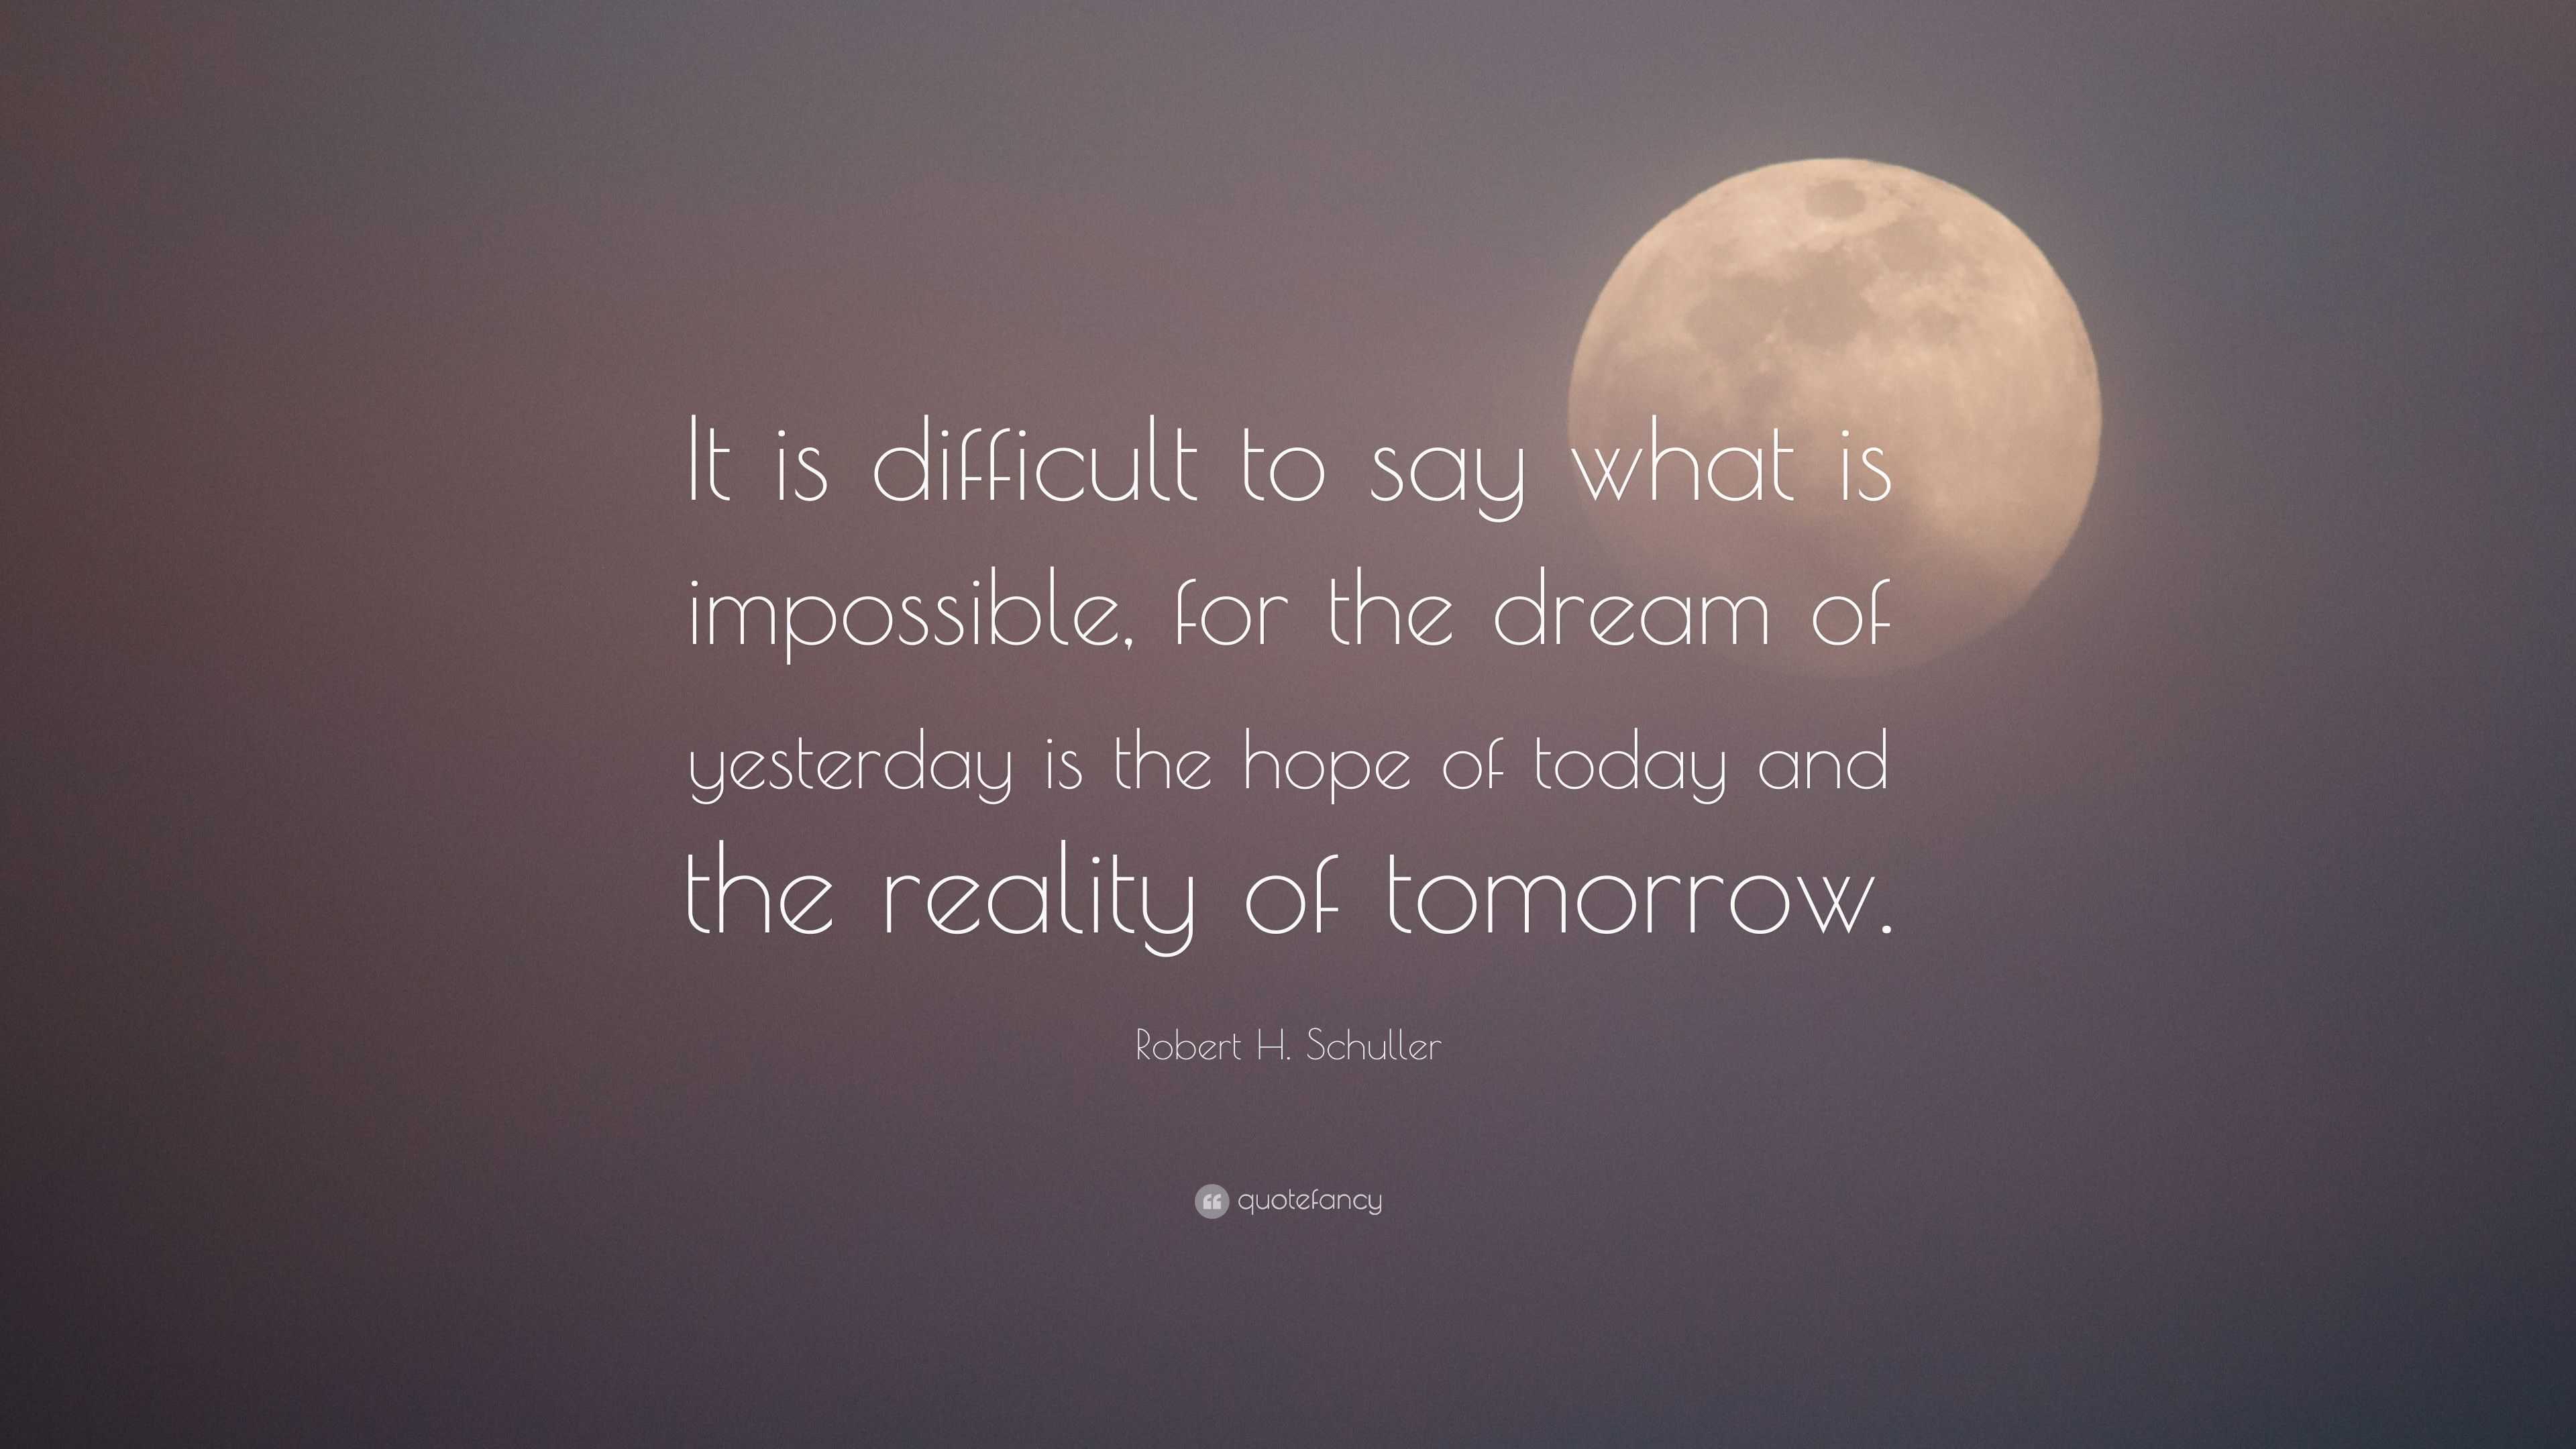 Robert H. Schuller Quote: “It is difficult to say what is impossible ...